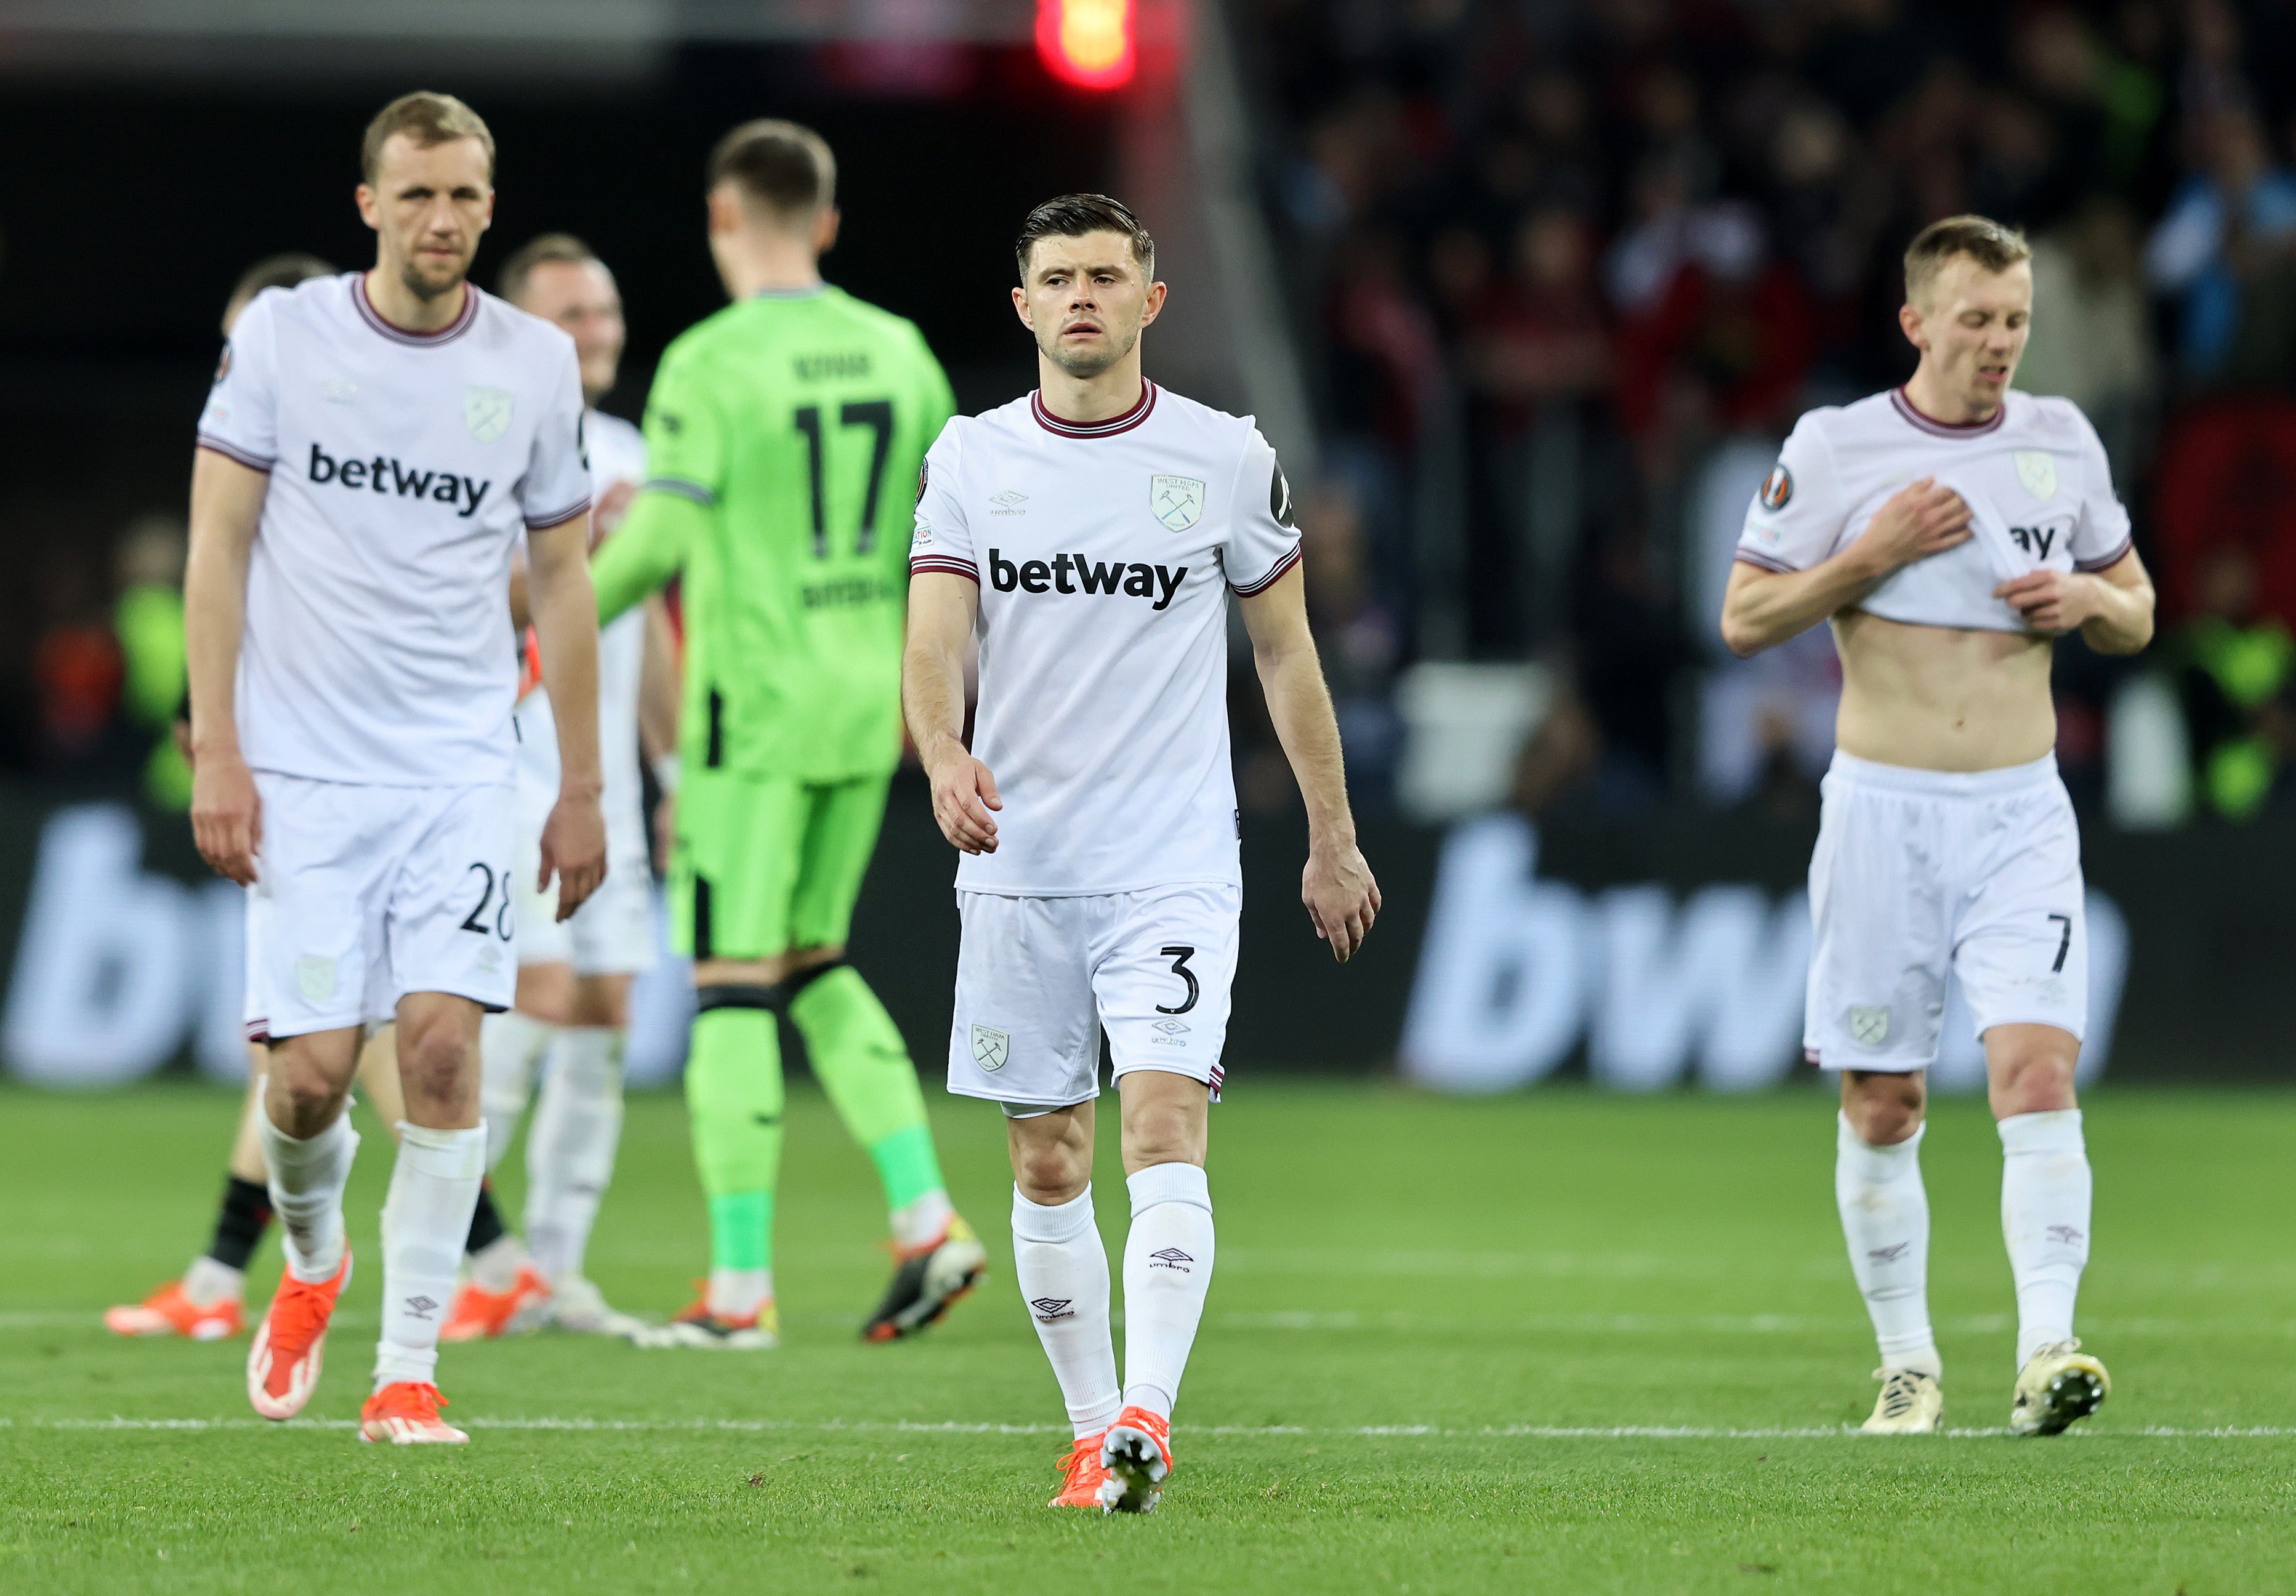 West Ham conceded two late goals to leave them on the back foot in their Europa League tie against the Bundesliga leaders.